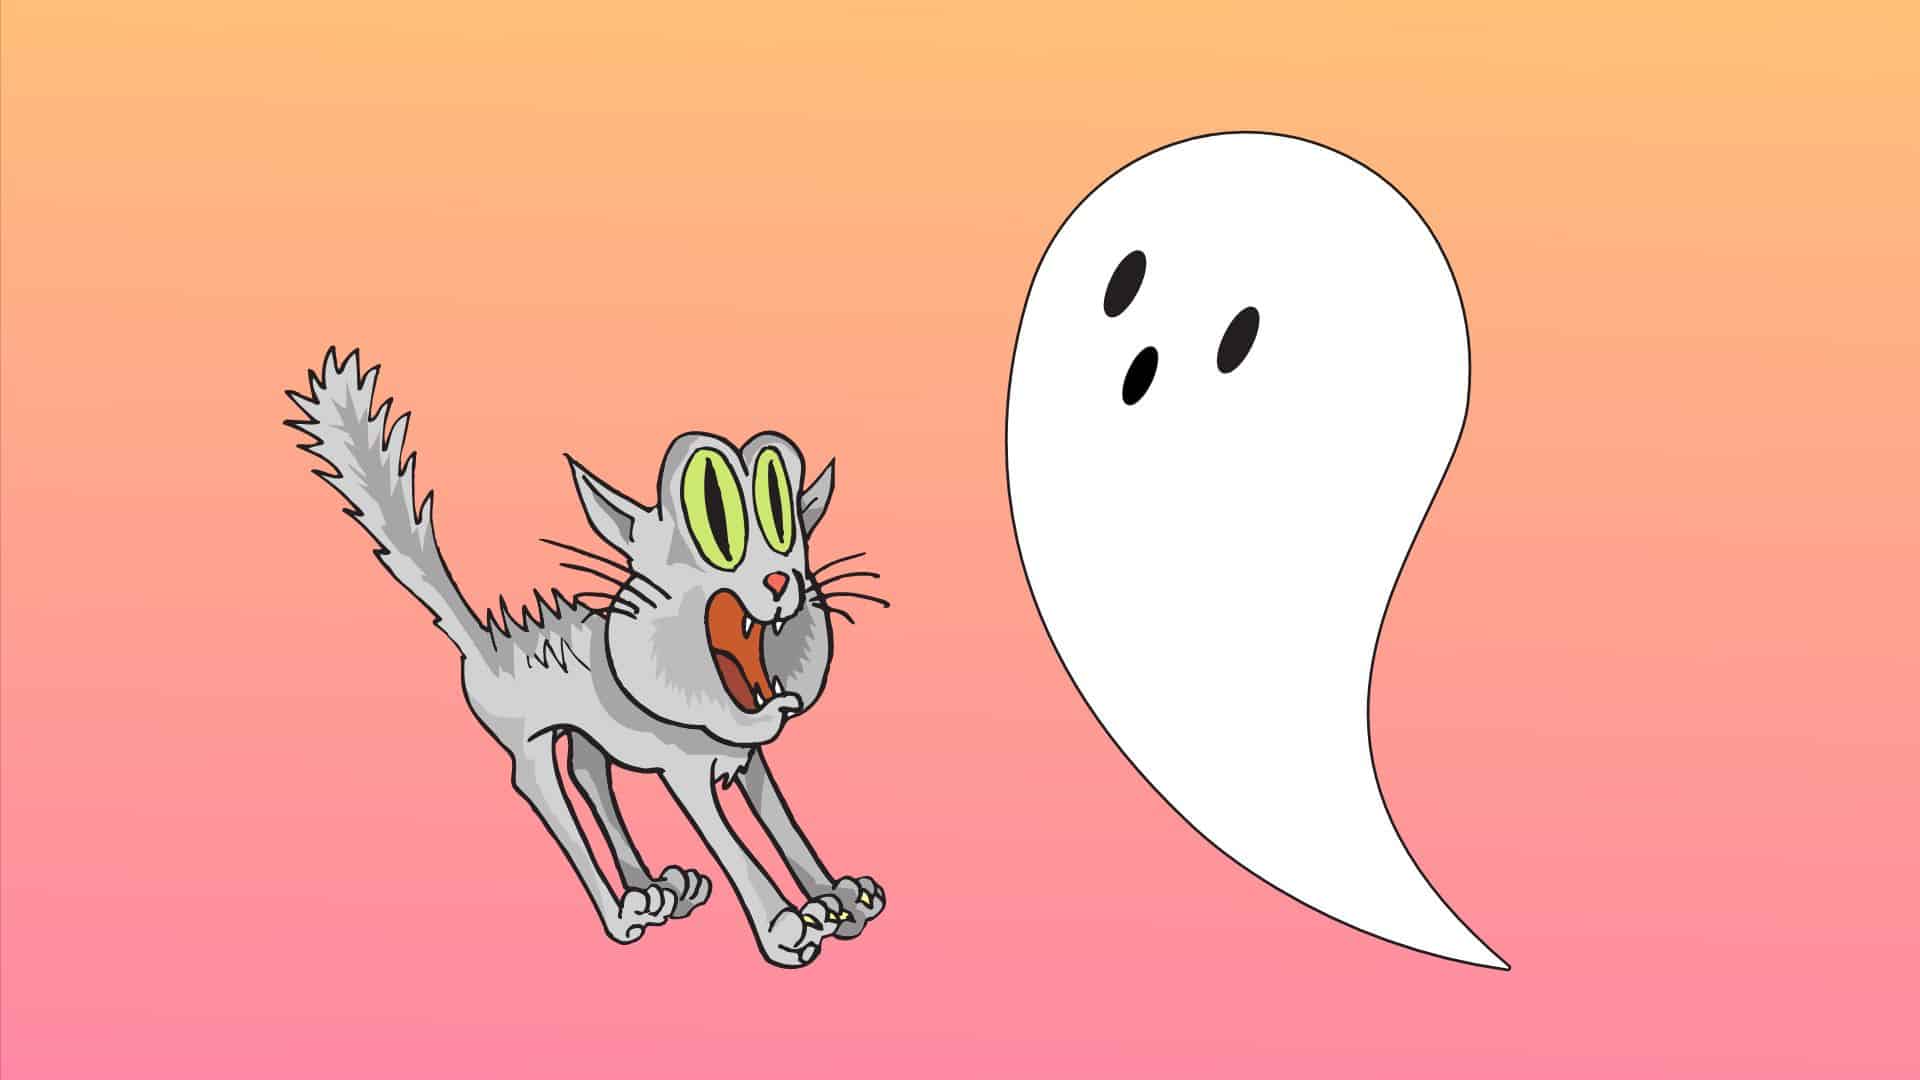 ghost and scared cat illustration